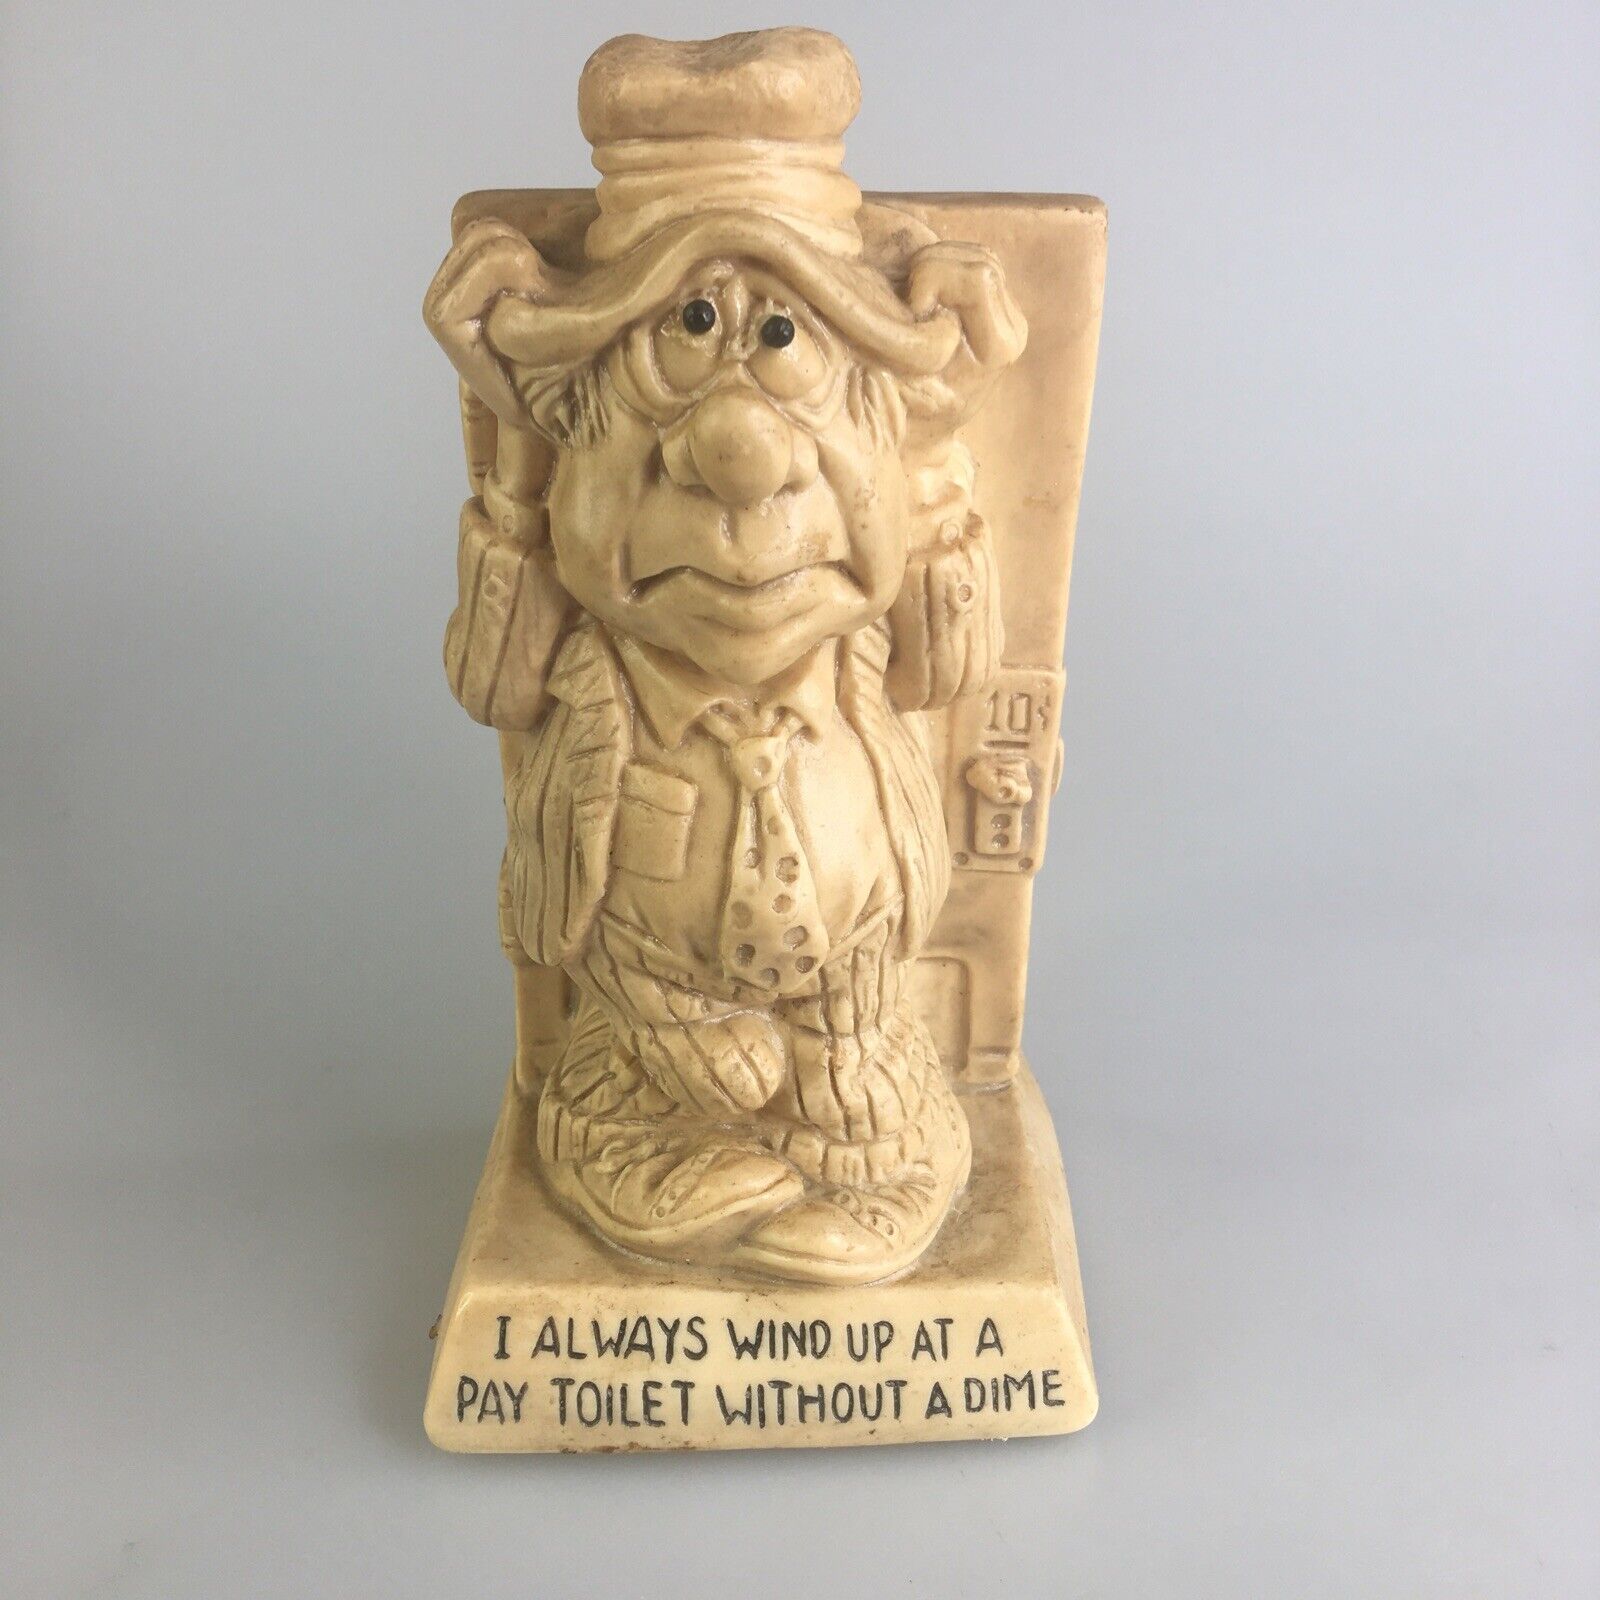 Wallace Berry & Co 1973 “I Always Wind Up At a Pay Toilet Without a Dime” 9095